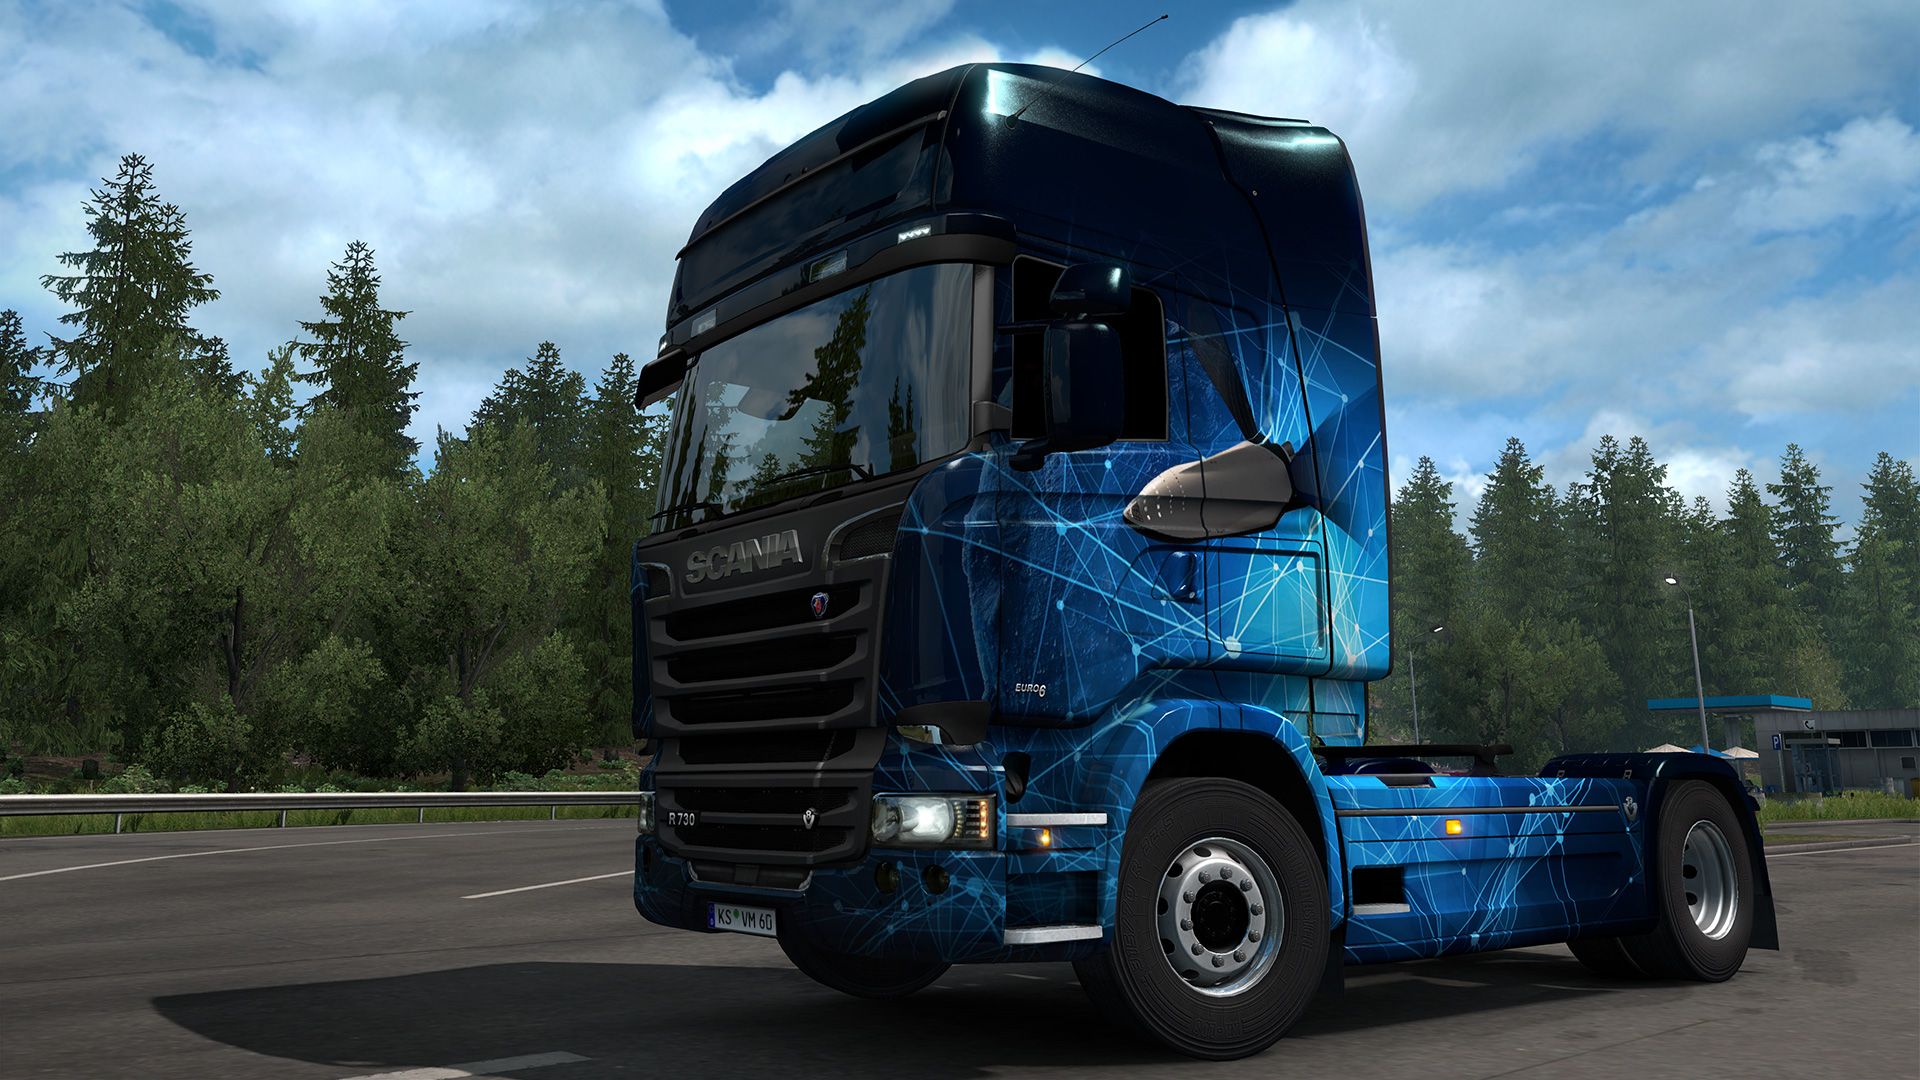 ETS2SPACE3